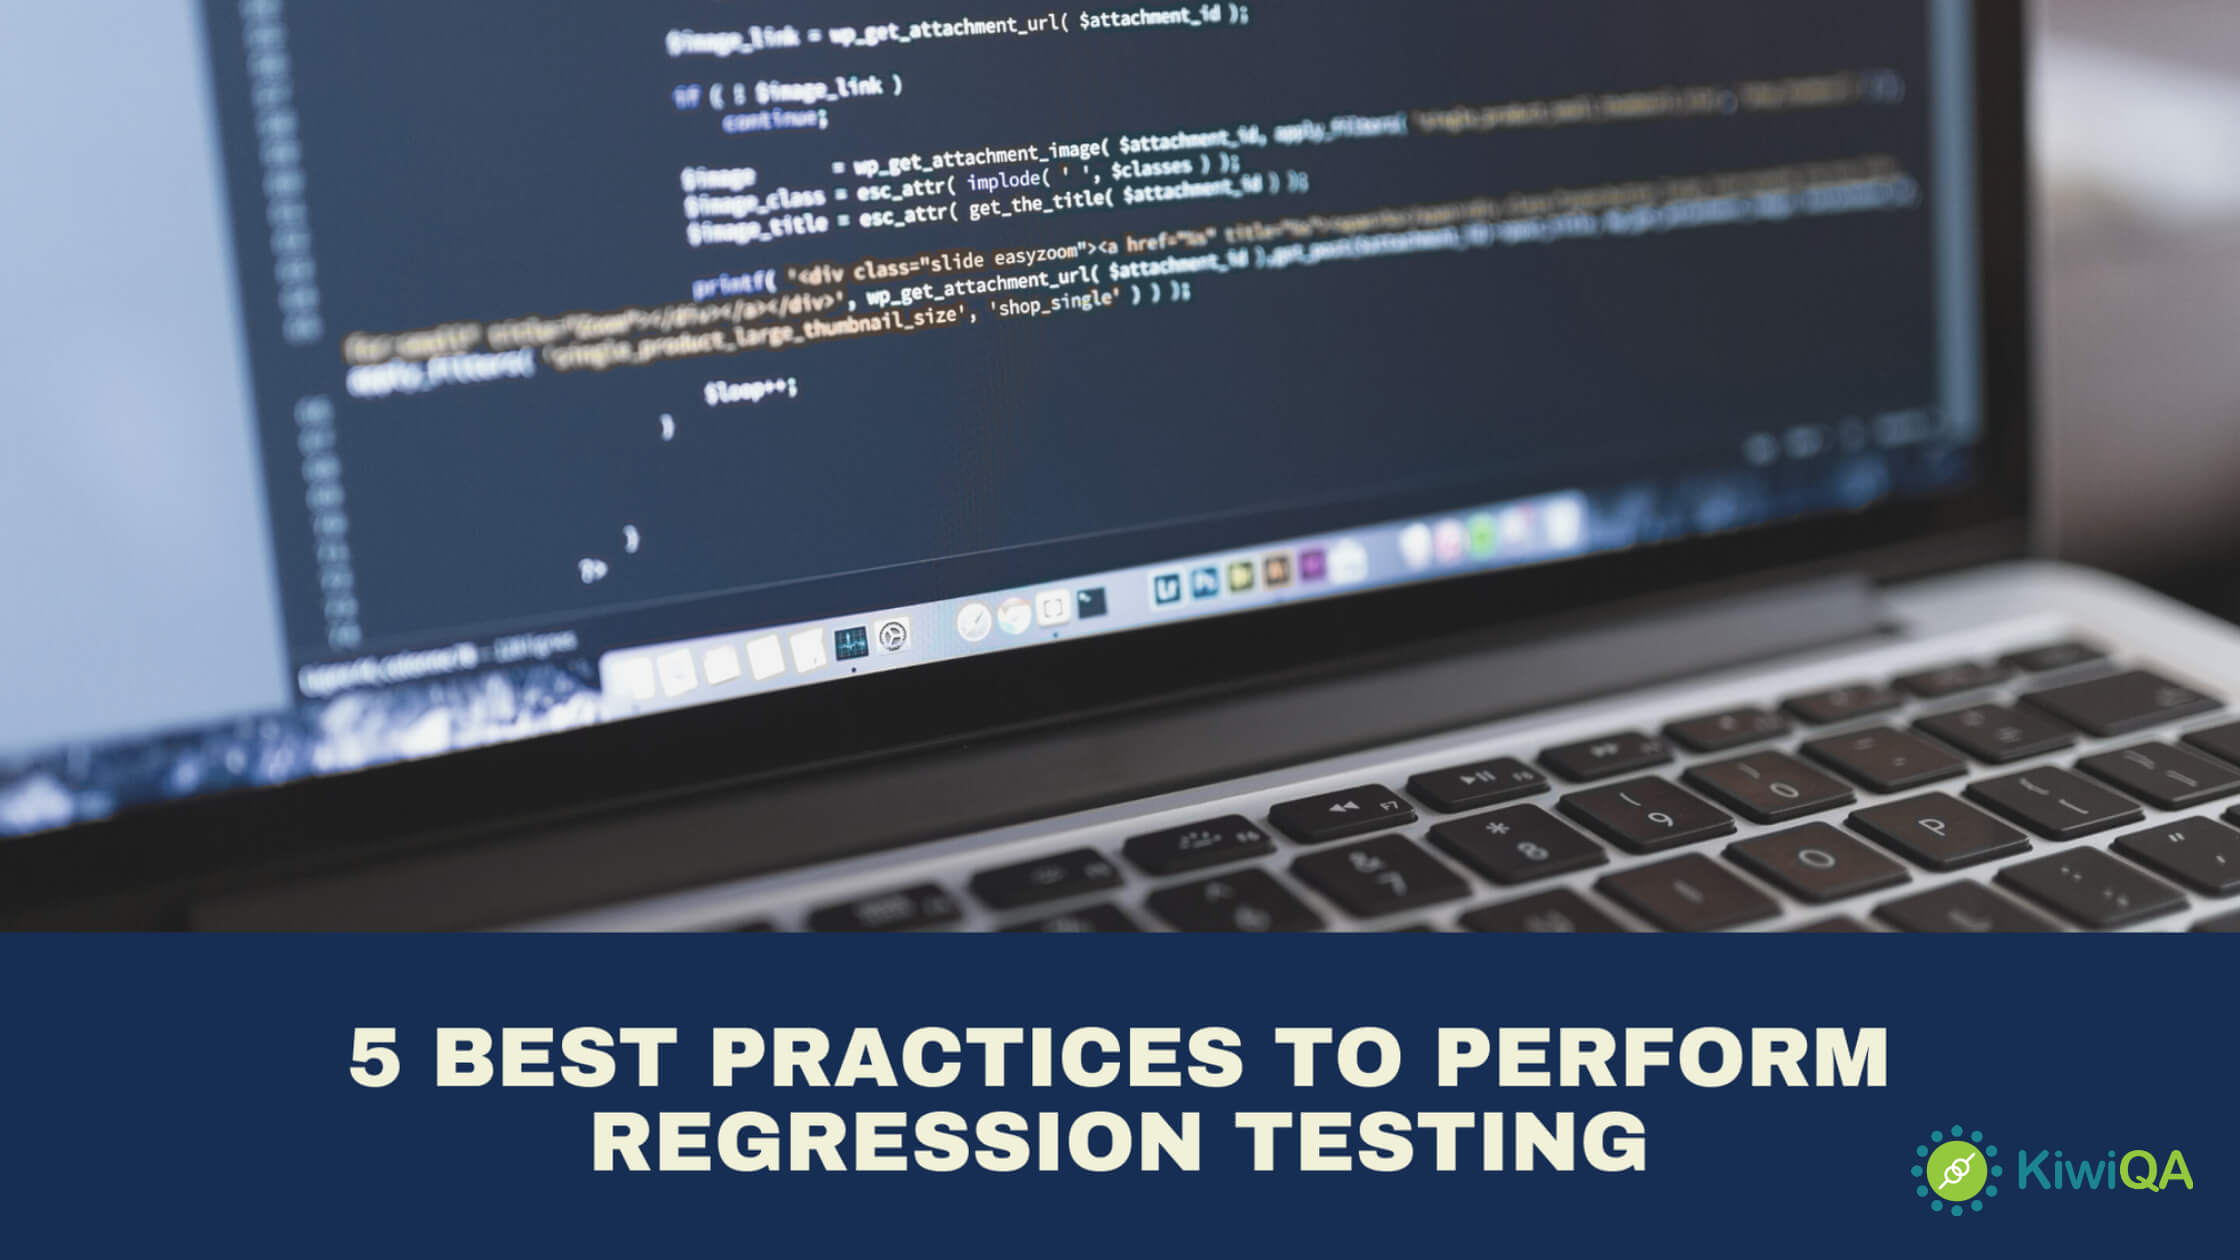 5 Best Practices to Perform Regression Testing